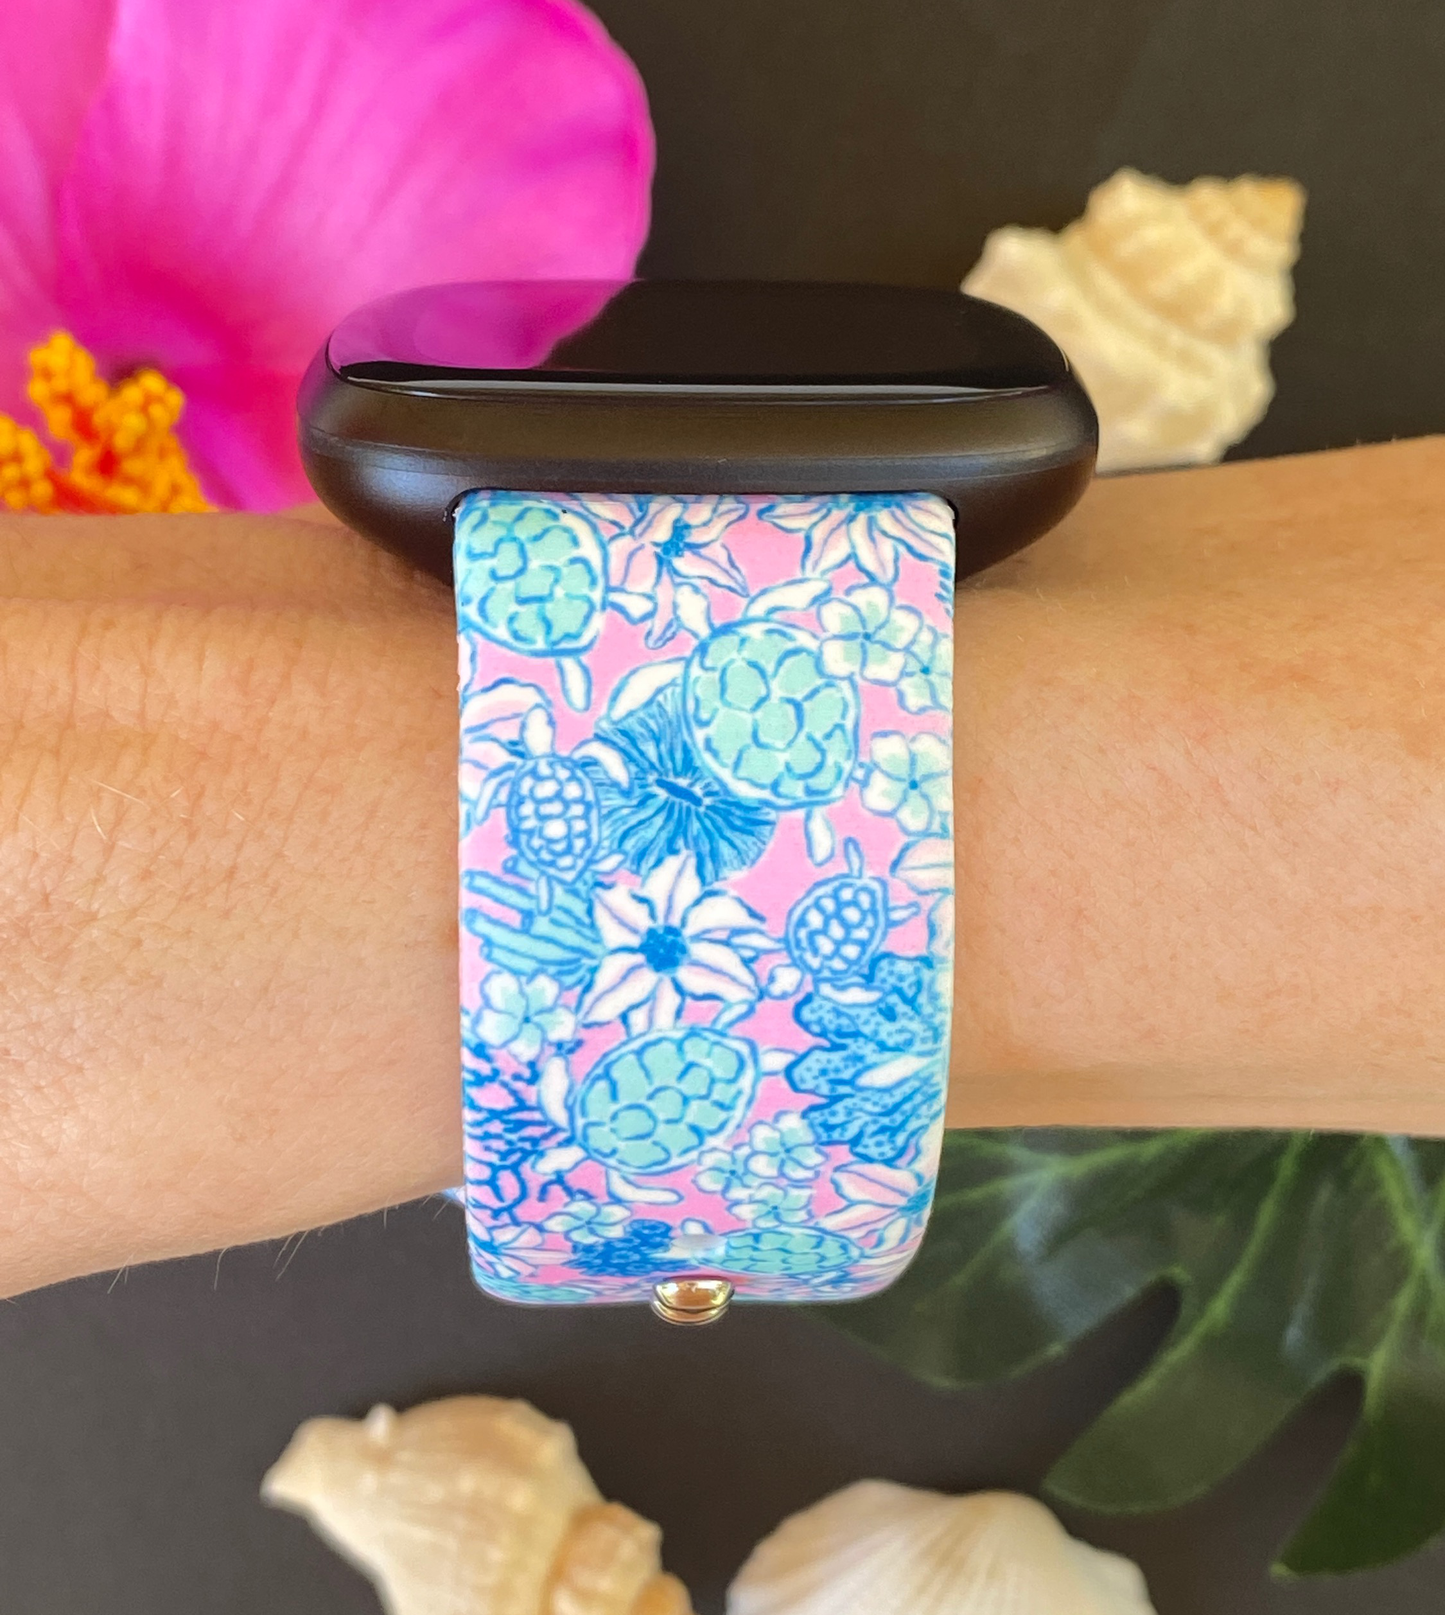 Floral Turtles Fitbit Versa 1/2 Watch Band